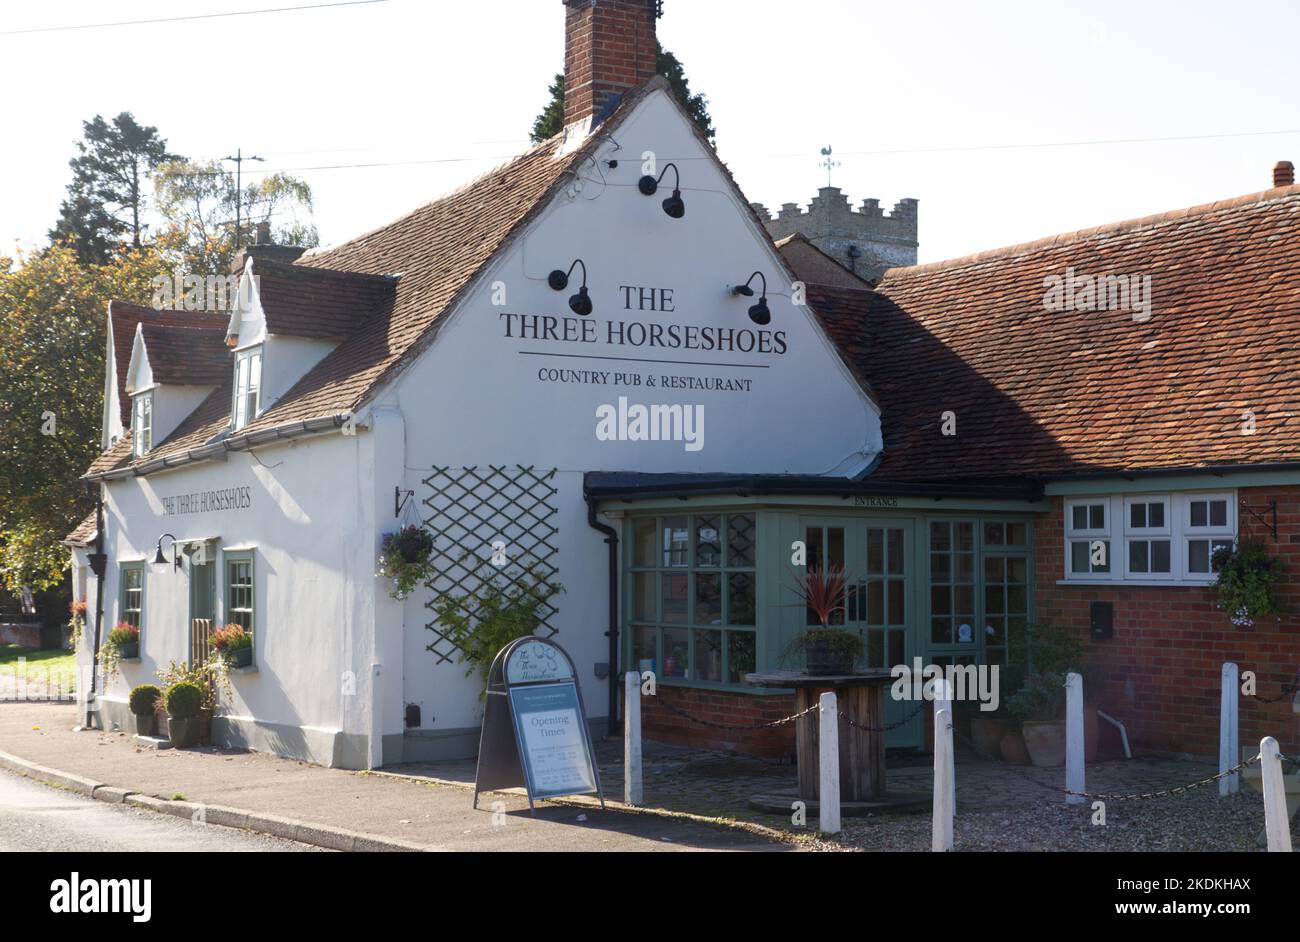 The Three Horseshoes, a restaurant and country pub in Fordham, Essex. Stock Photo